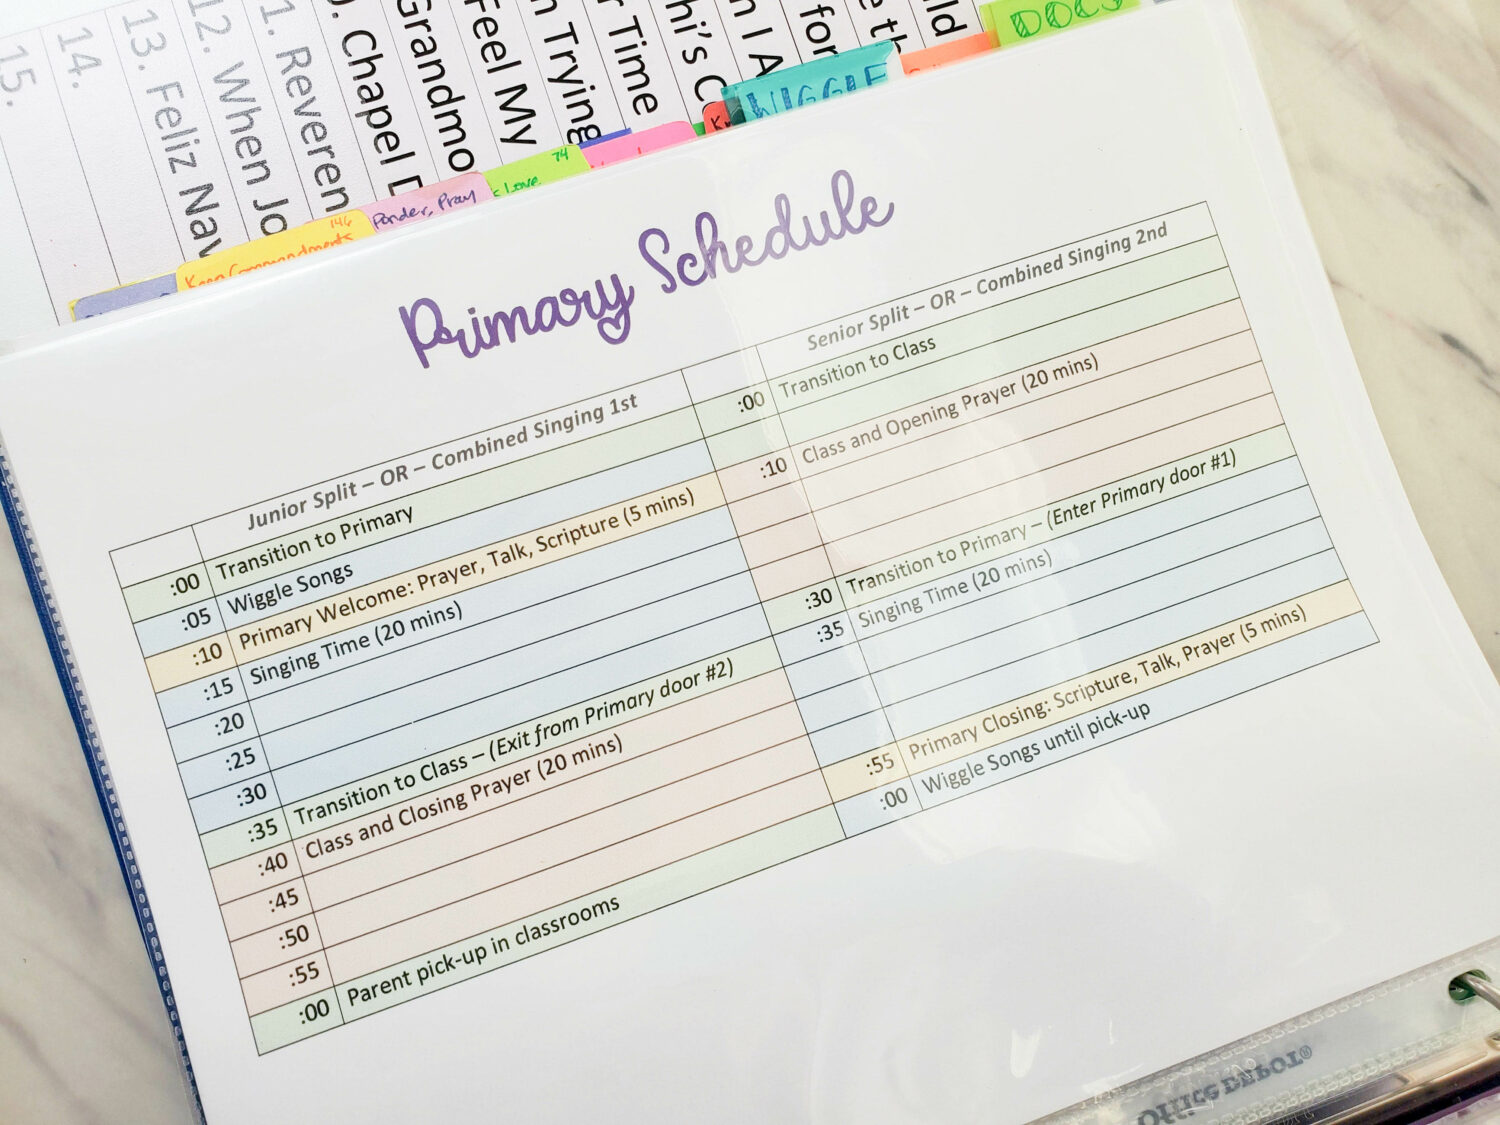 Getting Organized in Singing Time using file folders to easily sort printable lesson plans